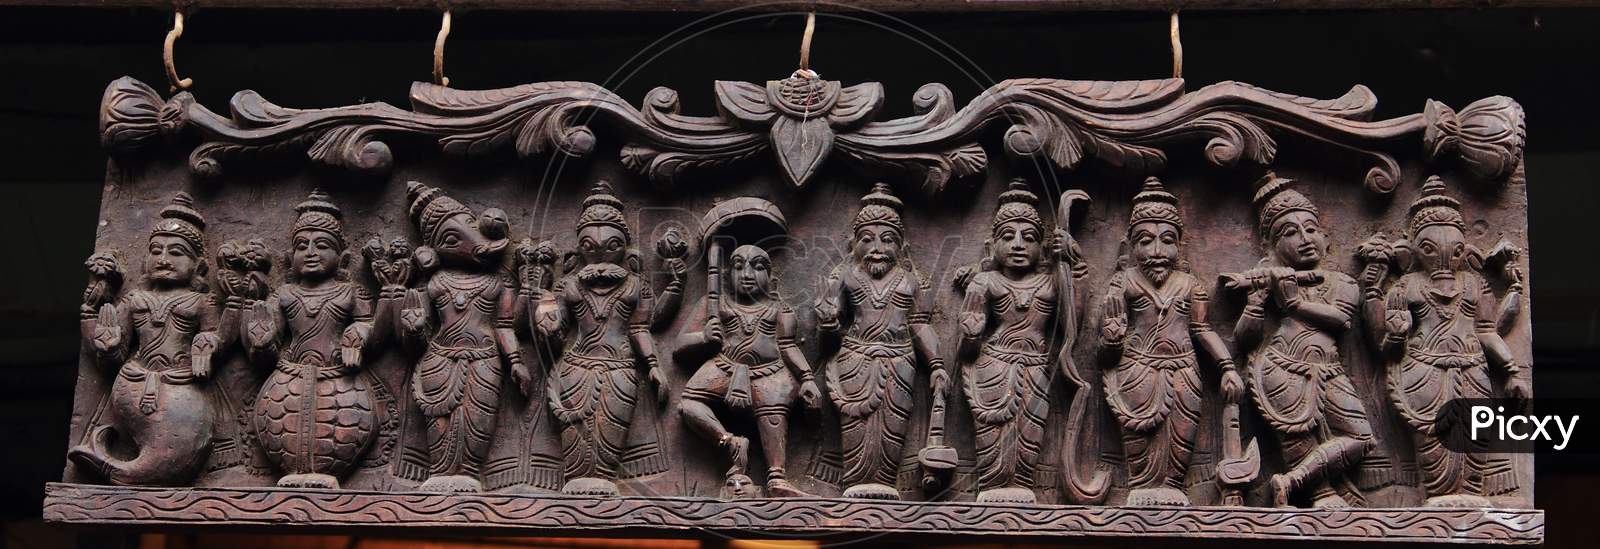 Old Indian art, carving on wood, artifact, India